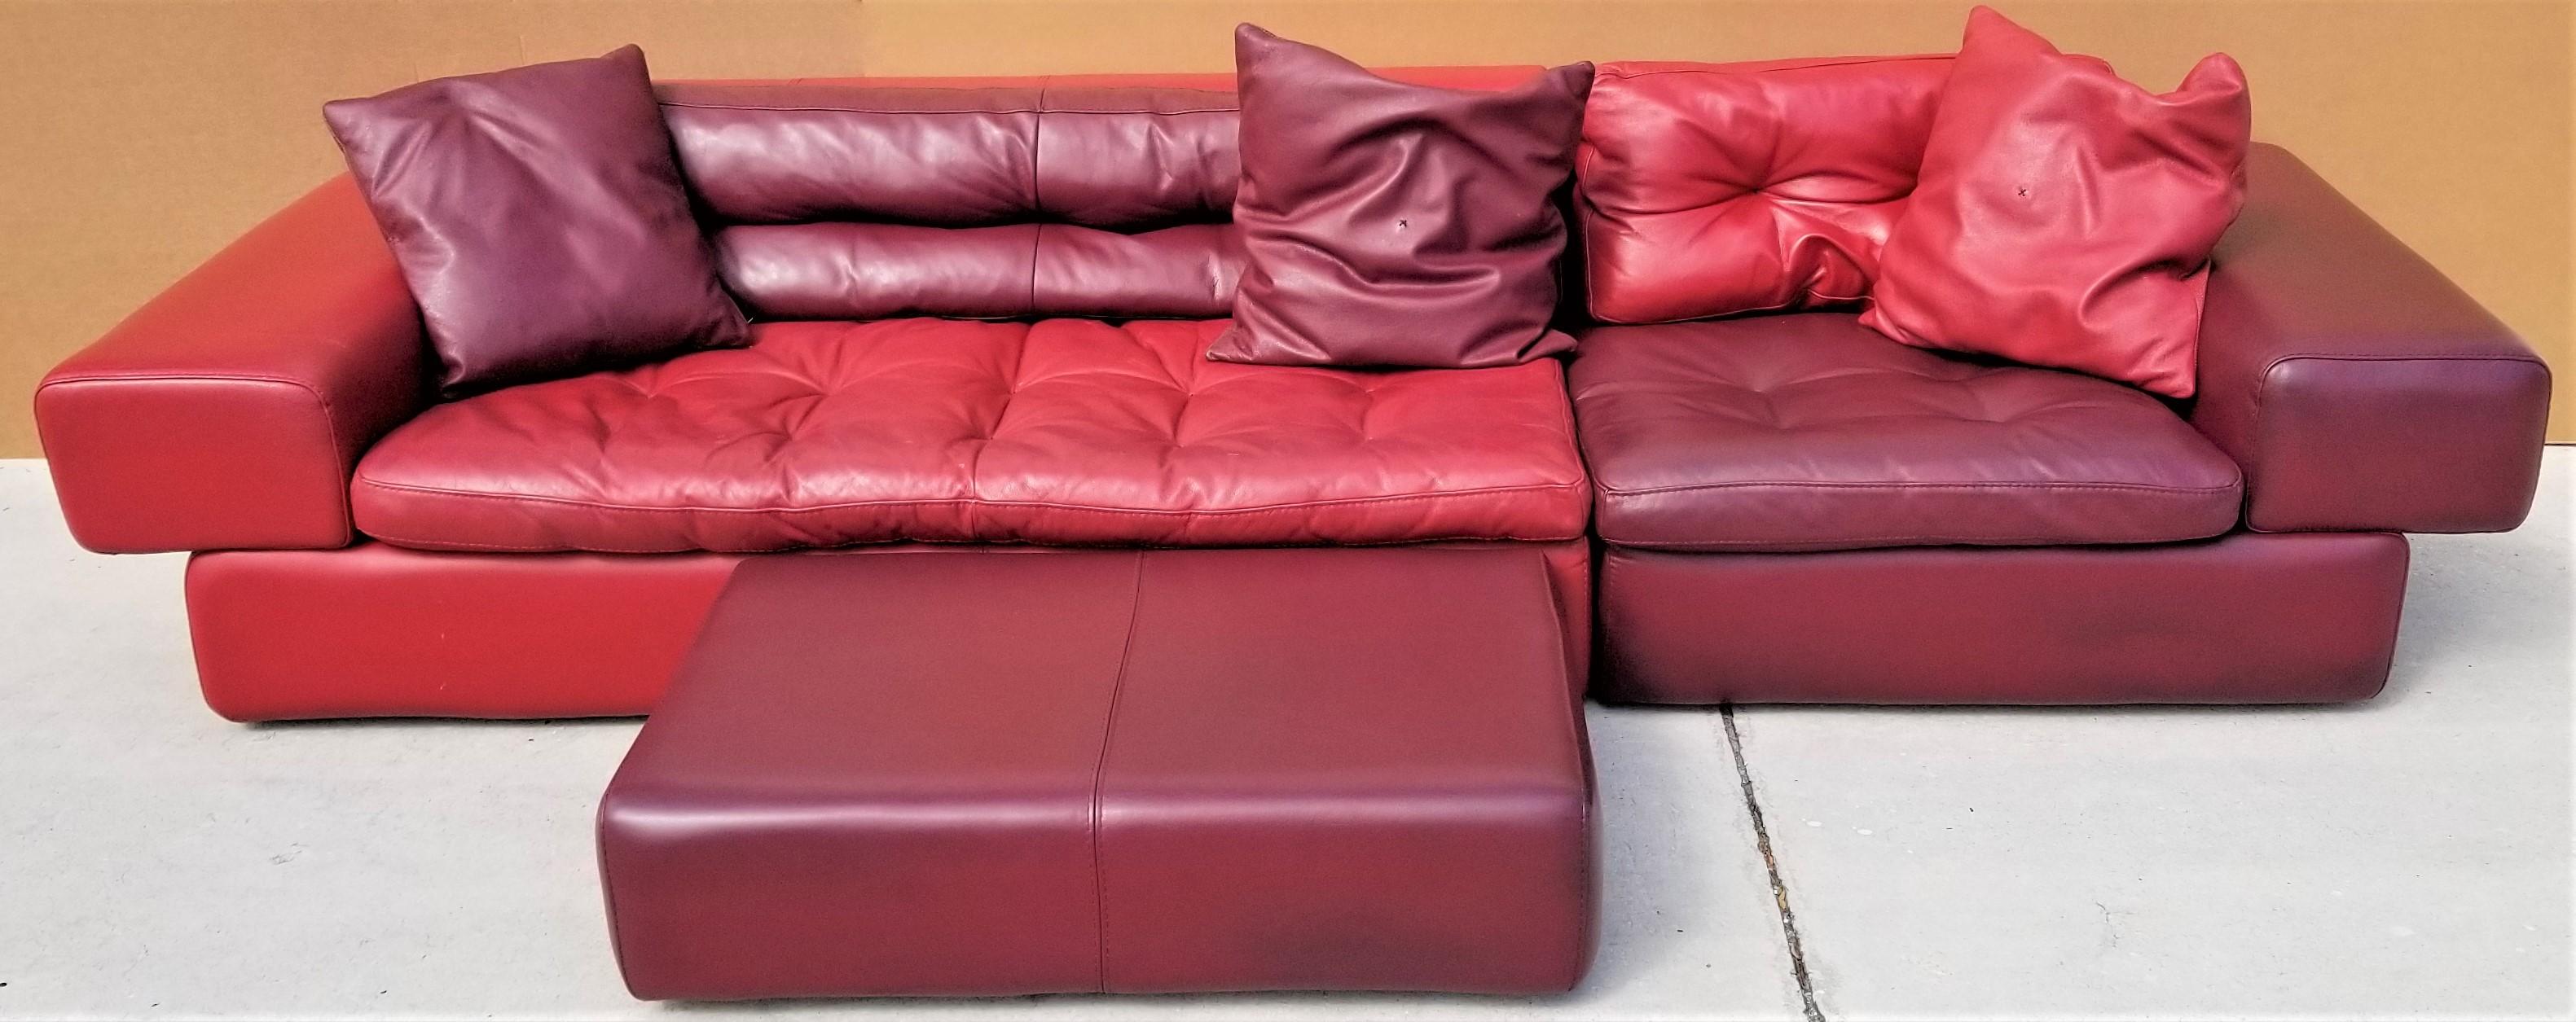 Offering one of our recent Palm Beach Estate fine furniture acquisitions of a
3 piece low-profile Roche Bobois leather sectional sofa with ottoman, 3 pillows in 2 tones of red
All the cushions zipper onto the base to keep them in place.
This is a